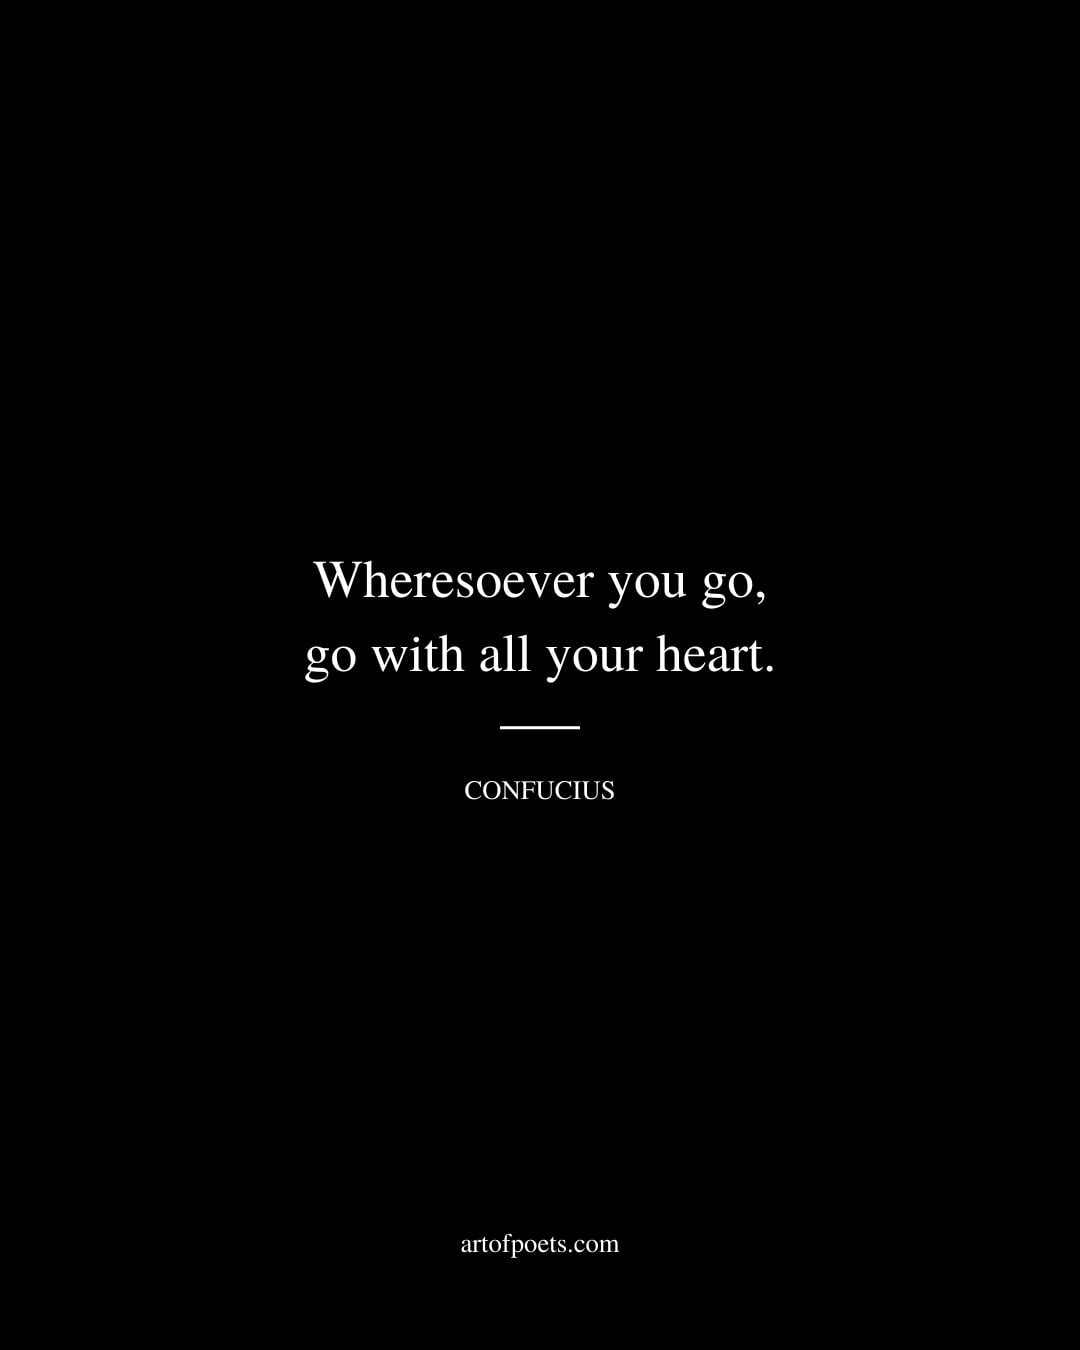 Wheresoever you go go with all your heart